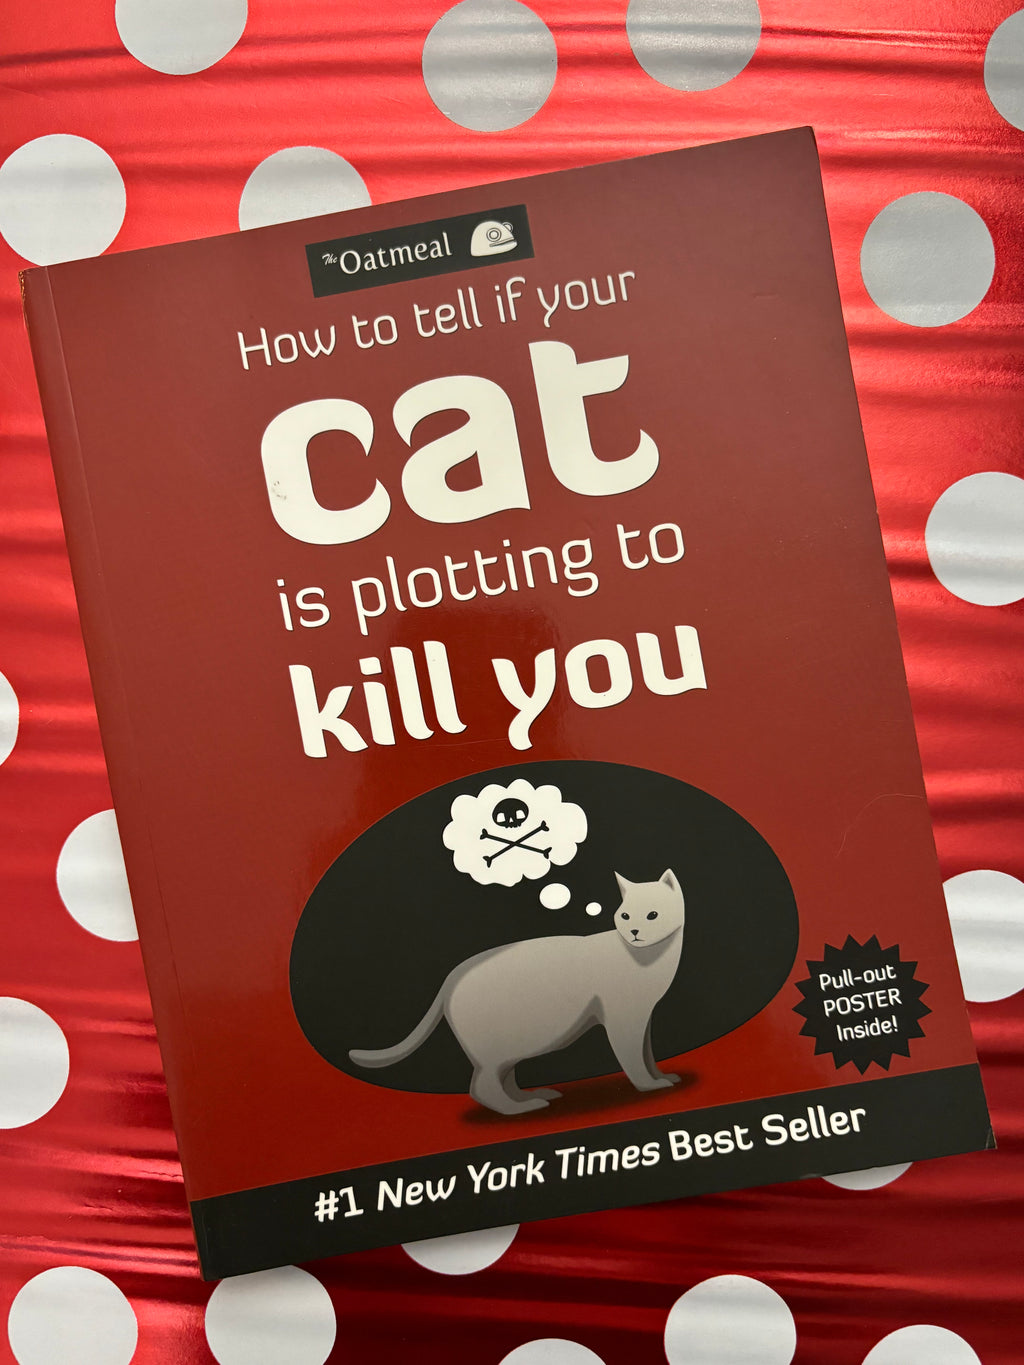 How to Tell if Your Cat is Plotting to Kill You- By The Oatmeal